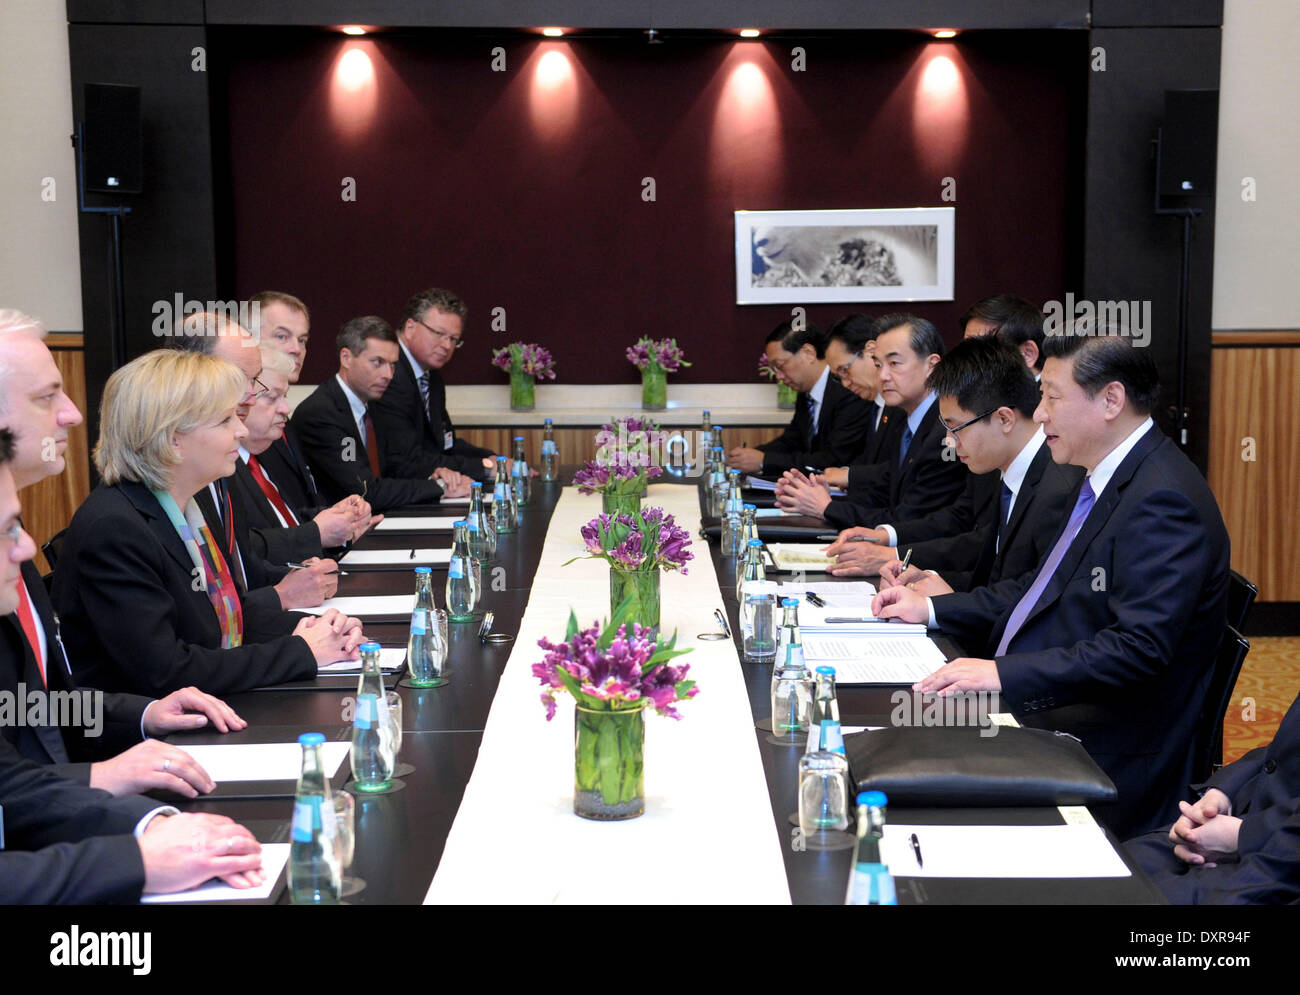 Duesseldorf, Germany. 29th Mar, 2014. Chinese President Xi Jinping (1st R) meets with North Rhine-Westphalia State Premier Hannelore Kraft in Duesseldorf, Germany, March 29, 2014. Credit:  Zhang Duo/Xinhua/Alamy Live News Stock Photo